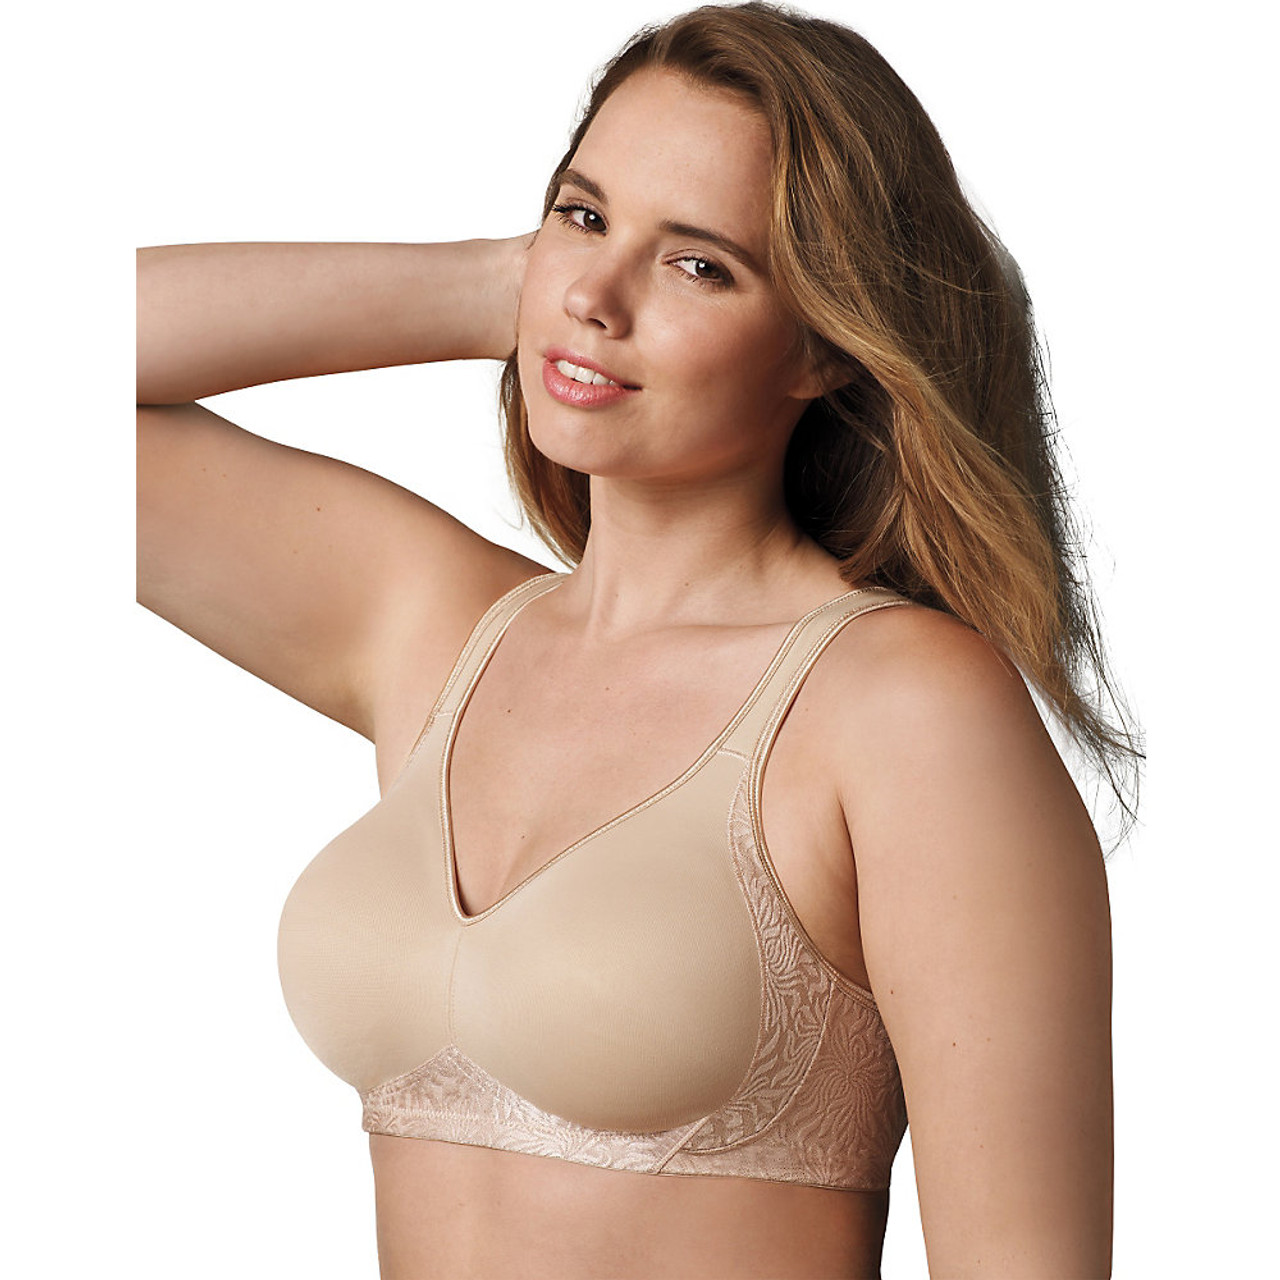 Playtex Women's 18 Hour Seamless Smoothing Wirefree Bra Nude Size 36C